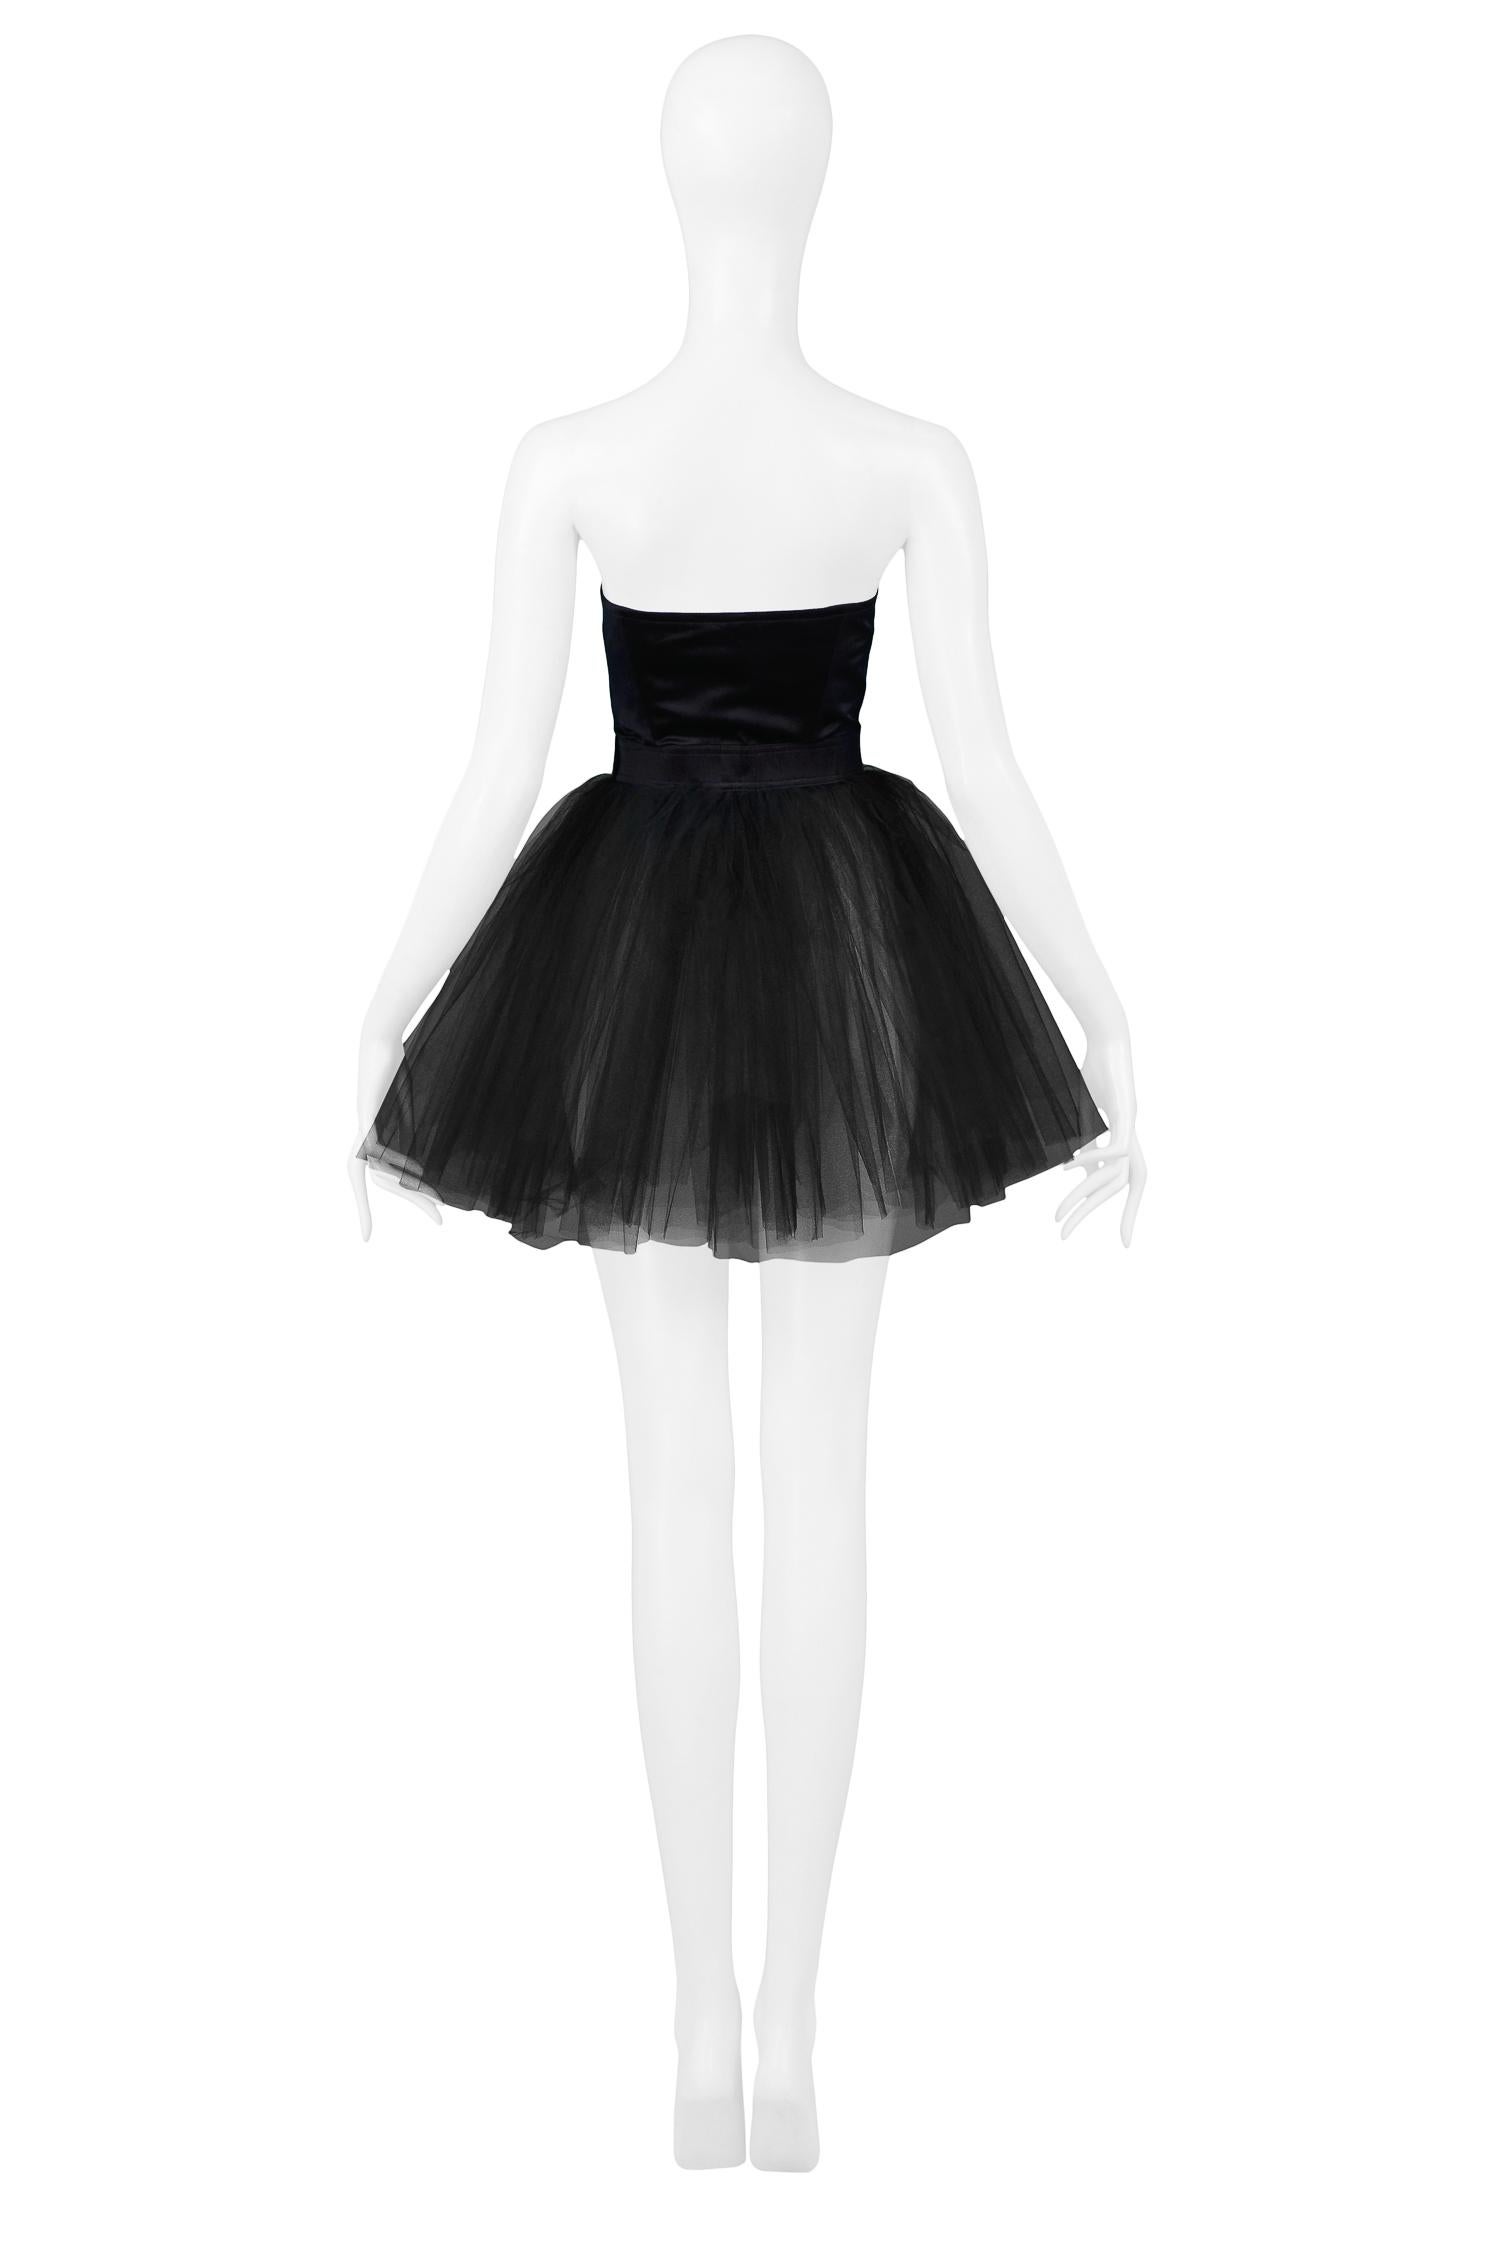 black ballerina outfit